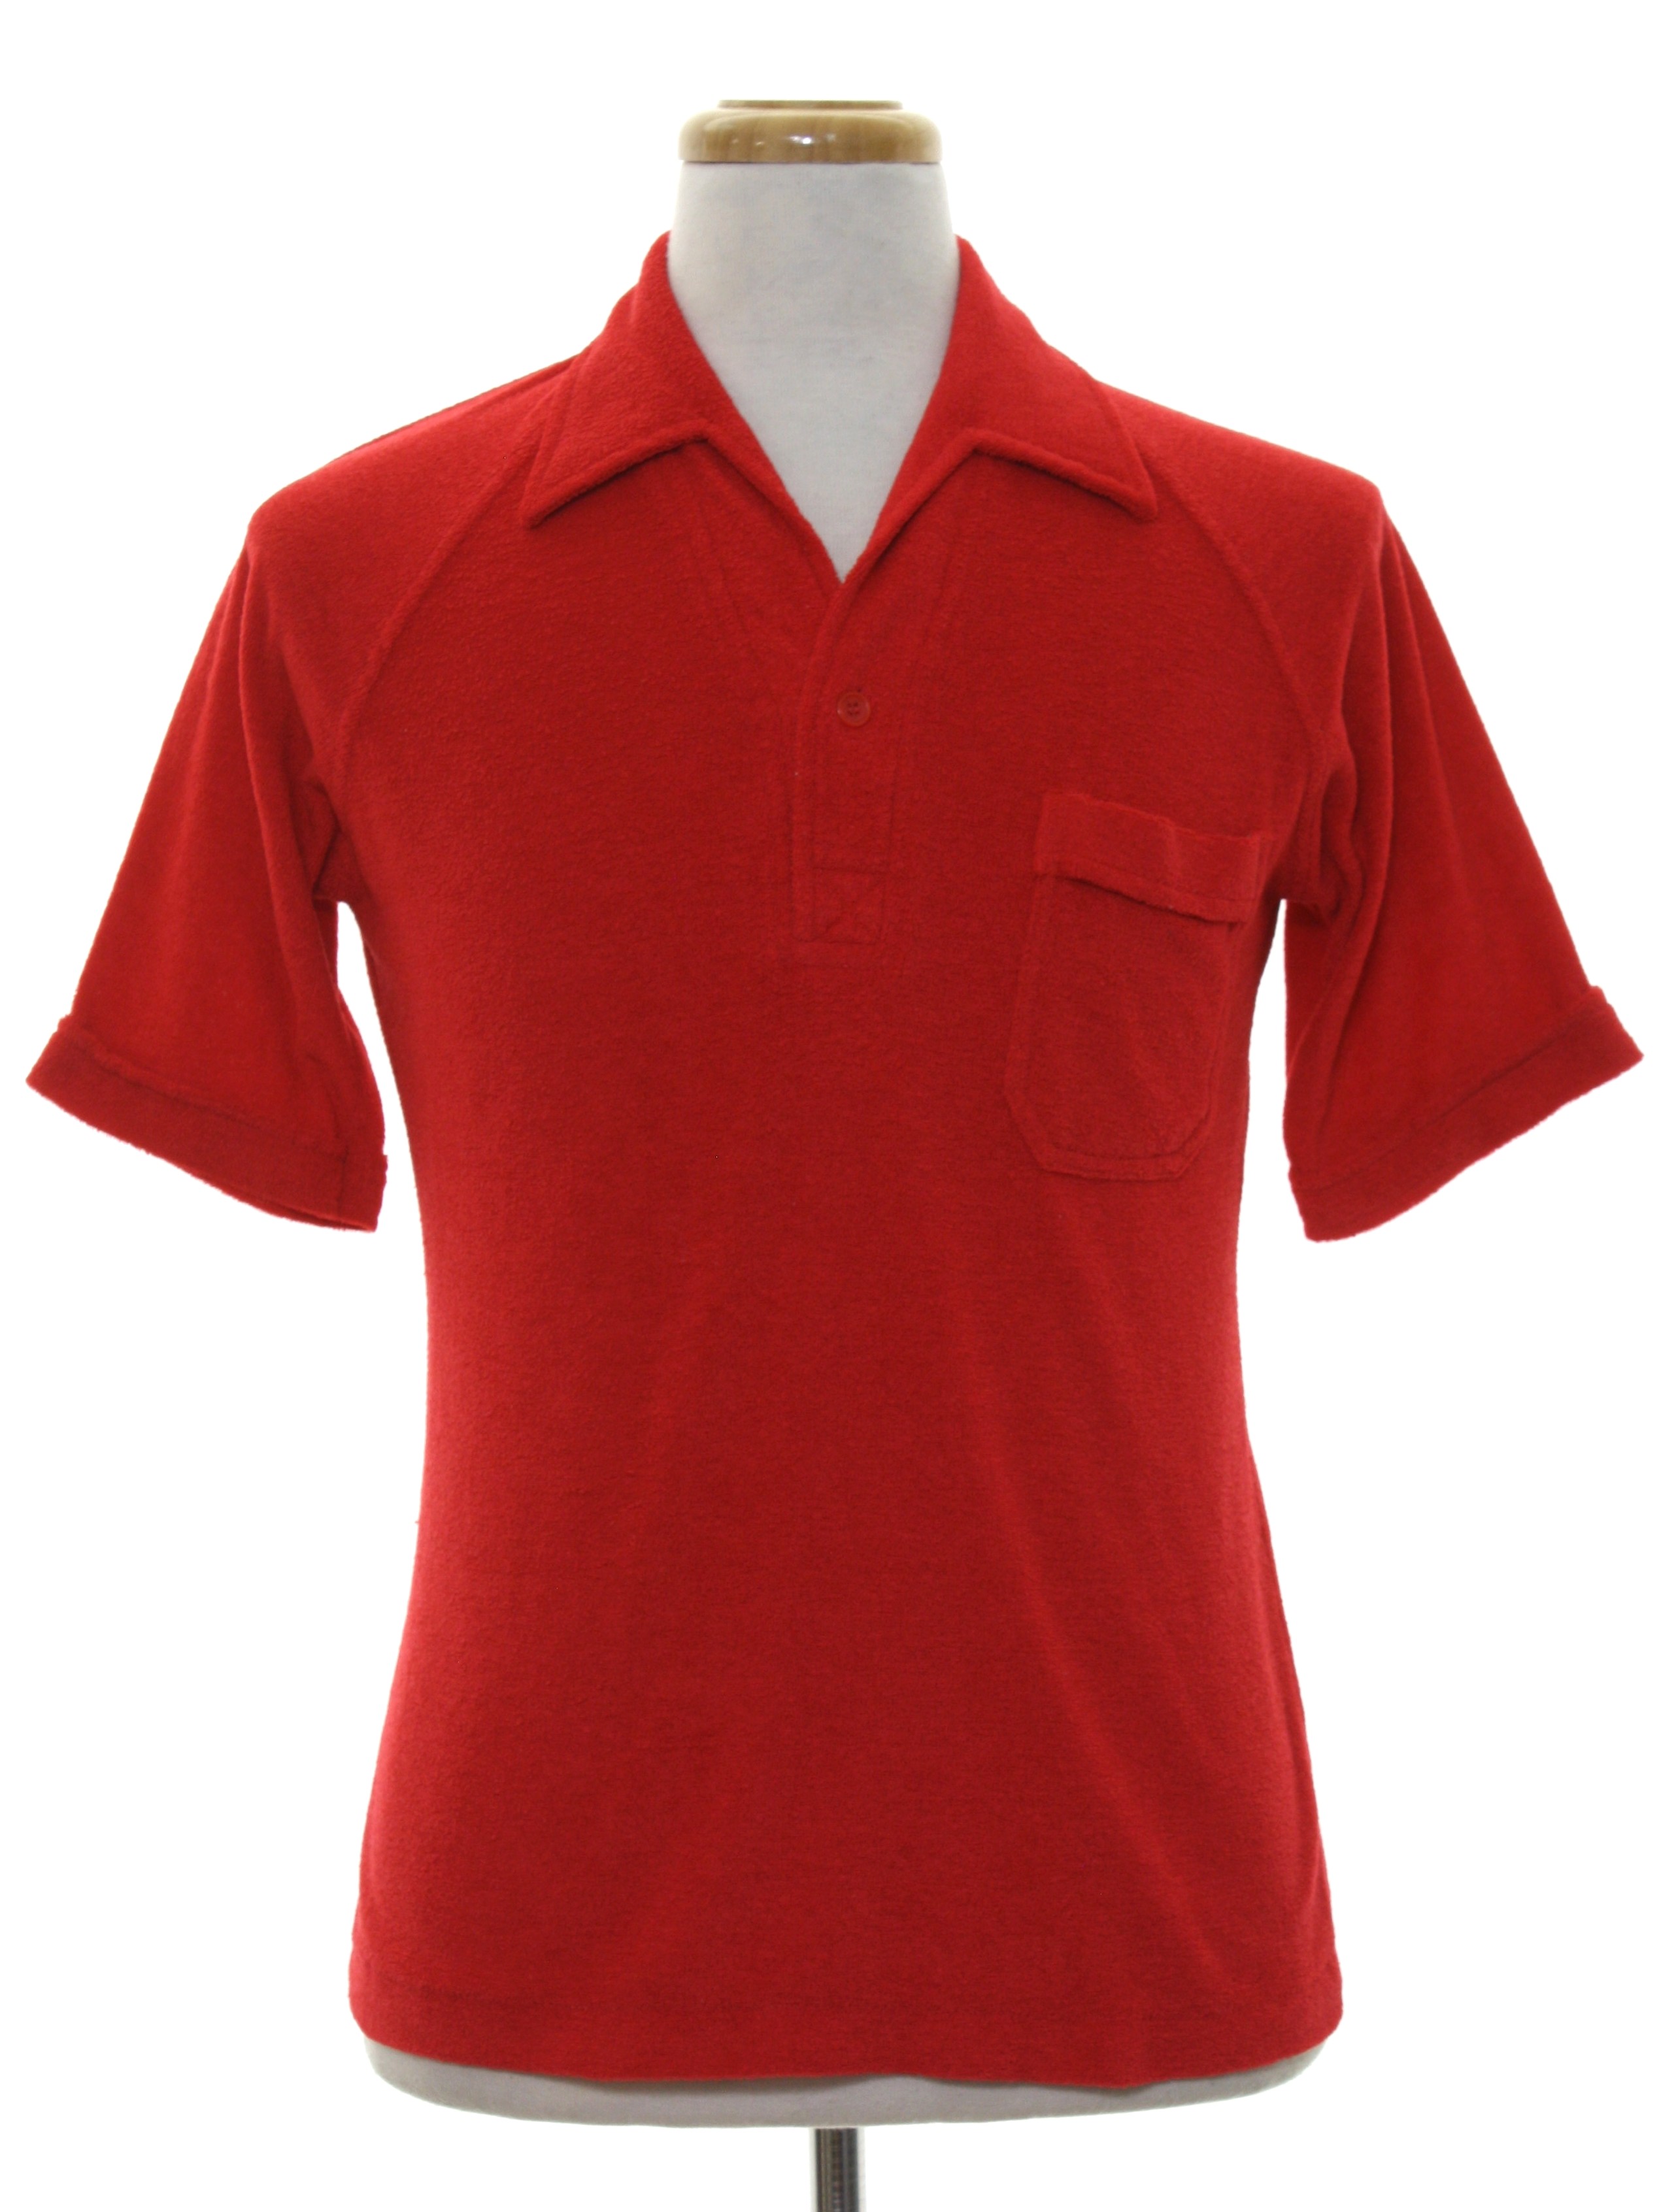 Seventies Vintage Knit Shirt: Late 70s -Morro Bay- Mens red polyester ...